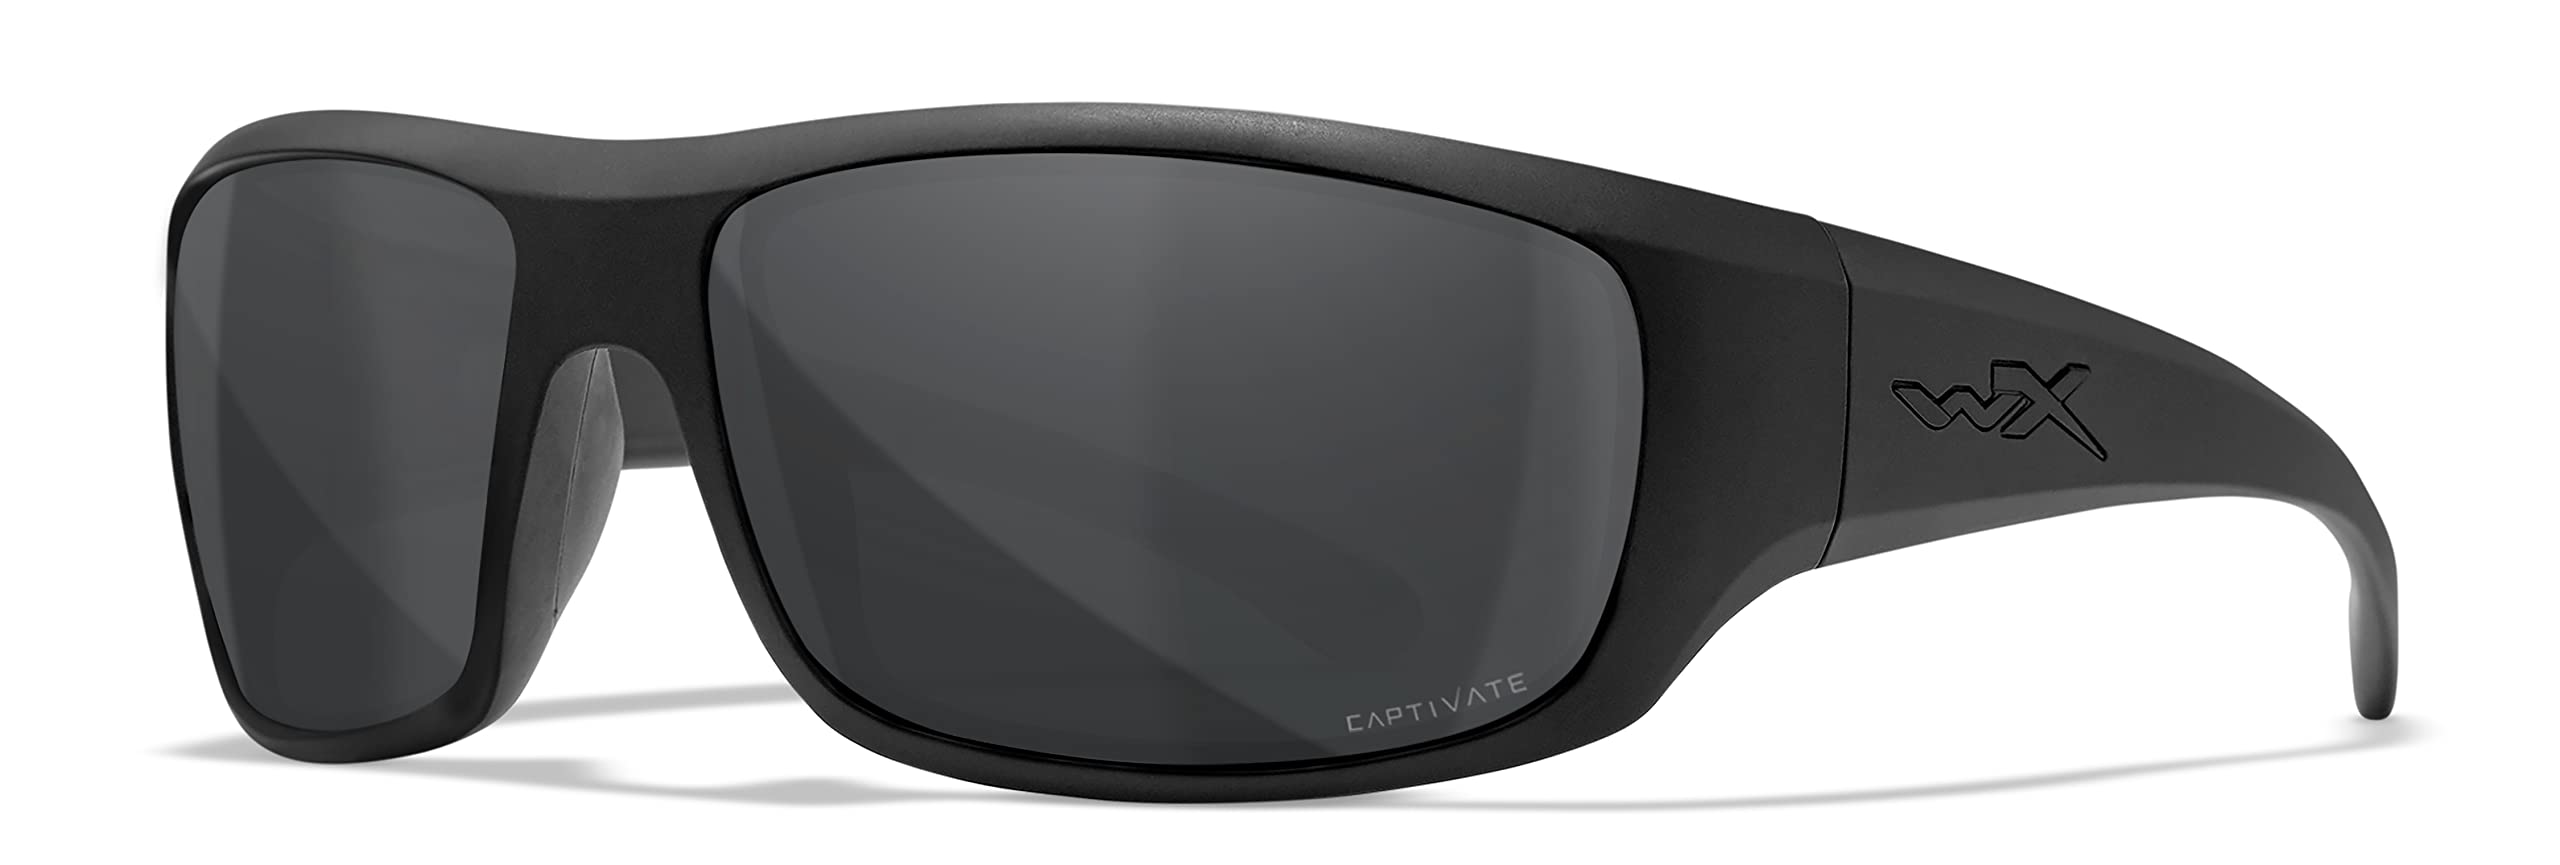 Wiley X WX Omega Captivate Polarized Sunglasses, ANSI Z87 Safety Glasses  for Men and Women, UV